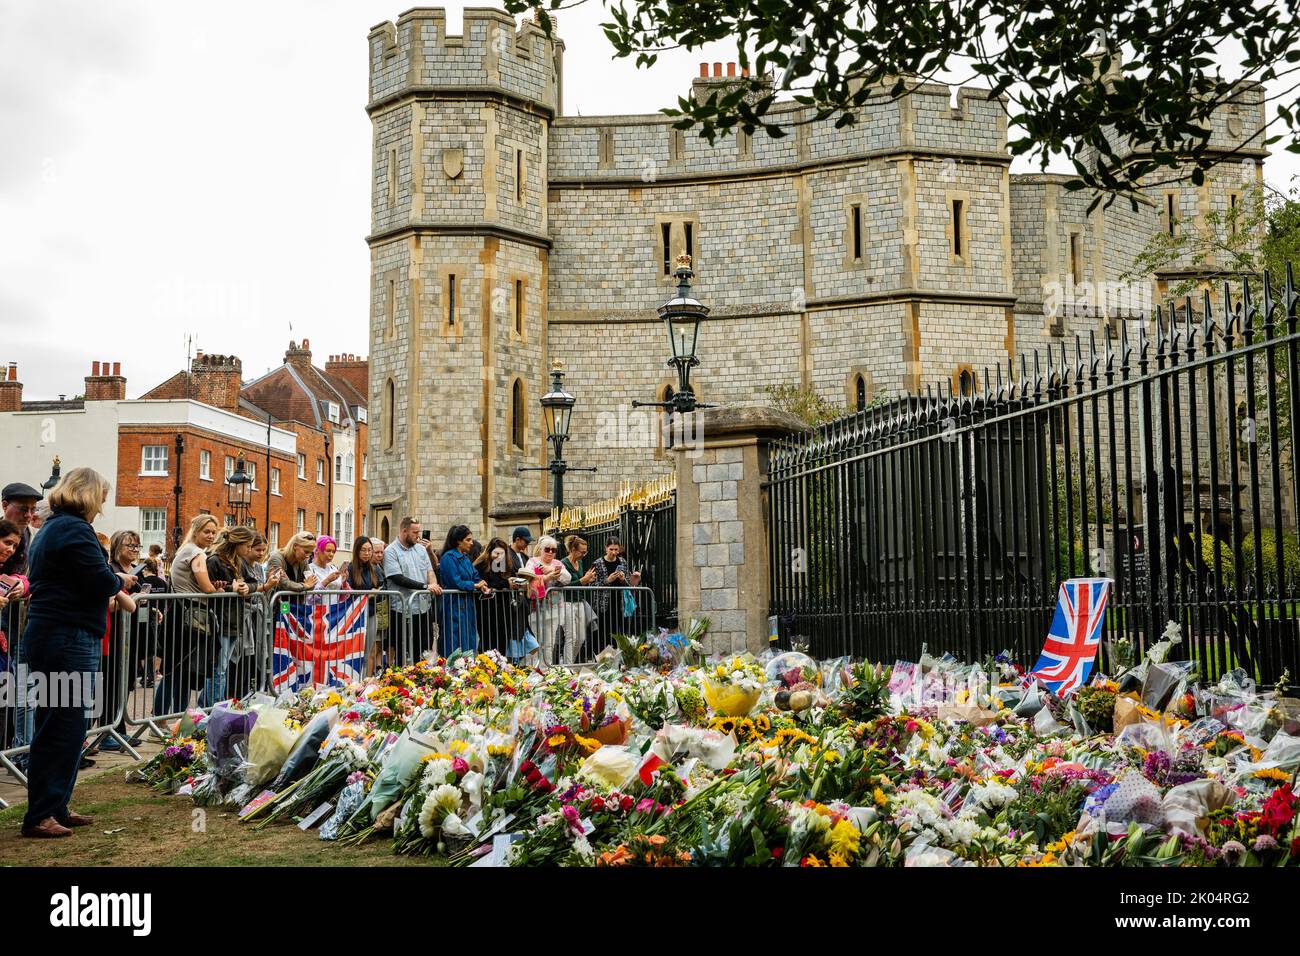 Windsor, UK. 9th September, 2022. Mourners view floral tributes outside Cambridge Gate at Windsor Castle a day after the death of Queen Elizabeth II. Queen Elizabeth II, the UK's longest-serving monarch, died at Balmoral aged 96 after a reign lasting 70 years. Credit: Mark Kerrison/Alamy Live News Stock Photo